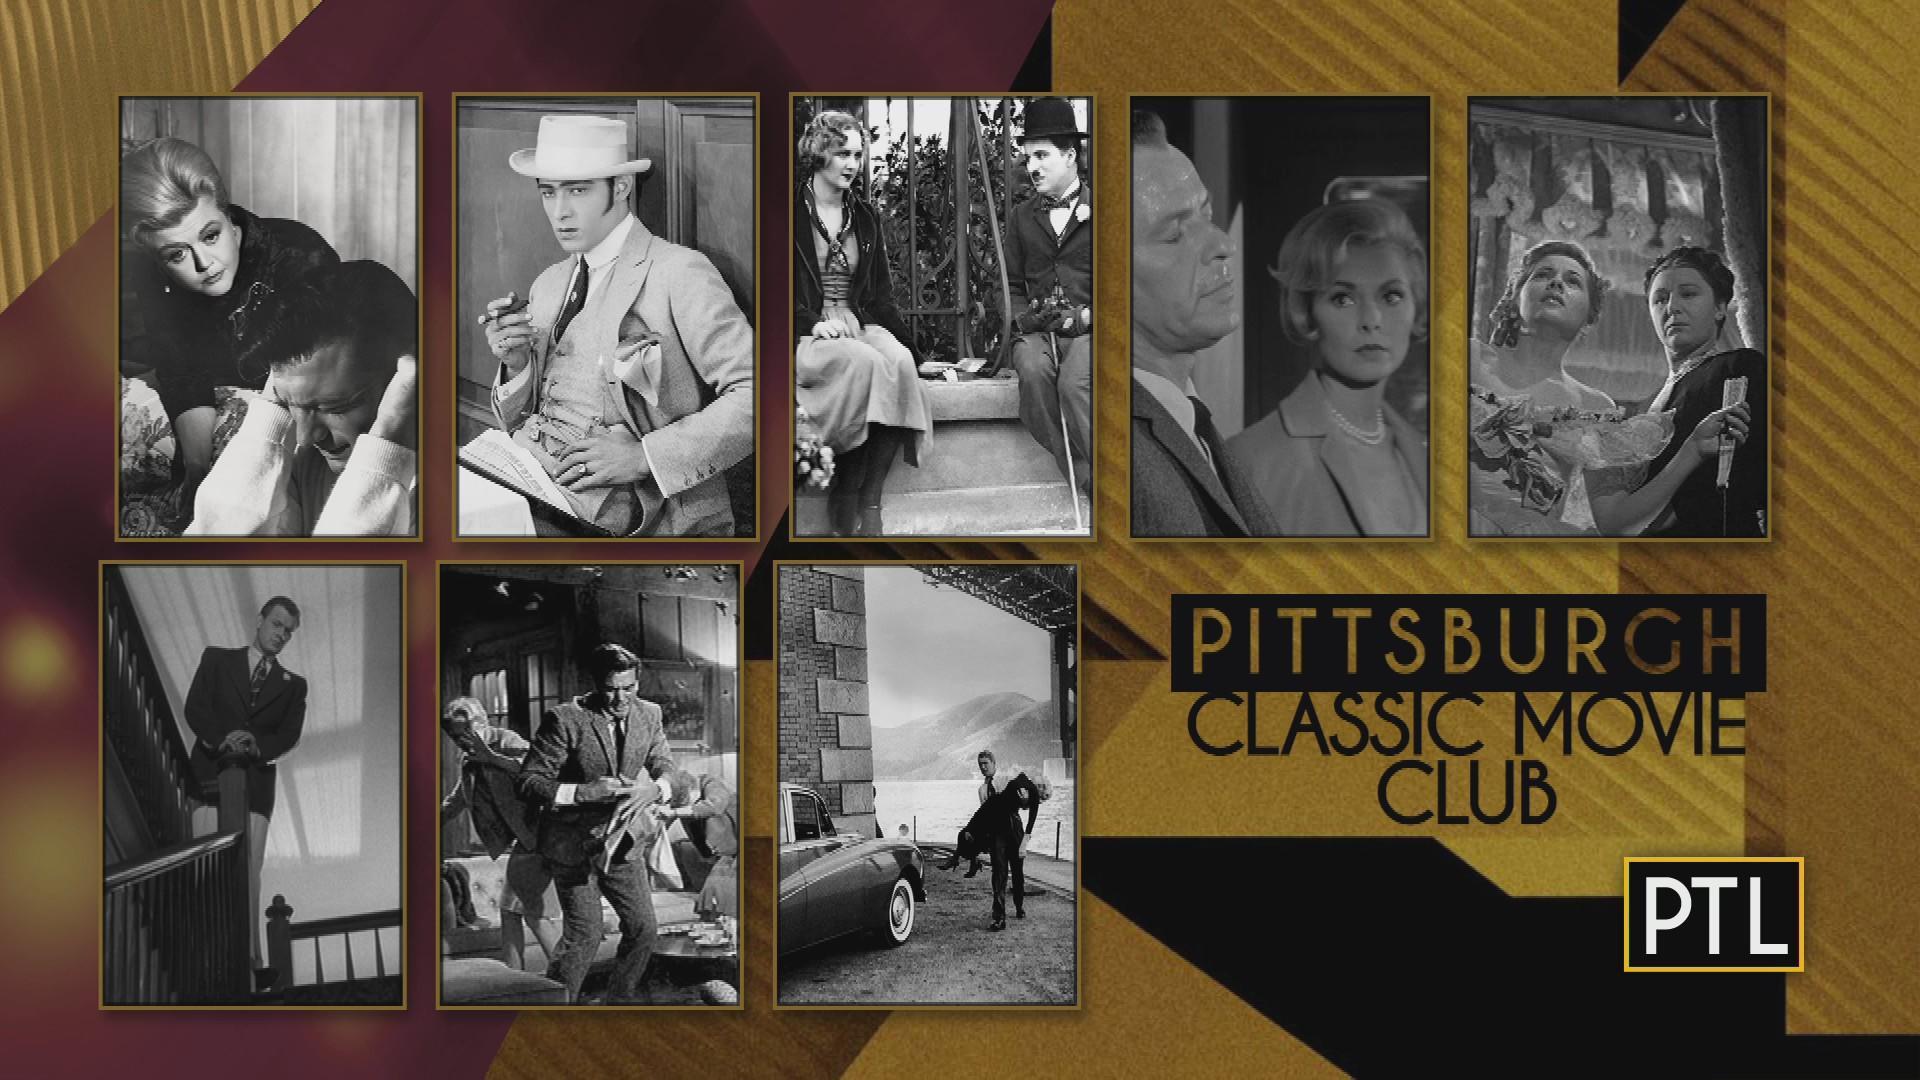 Pittsburgh Classic Movie Club celebrates old Hollywood - CBS